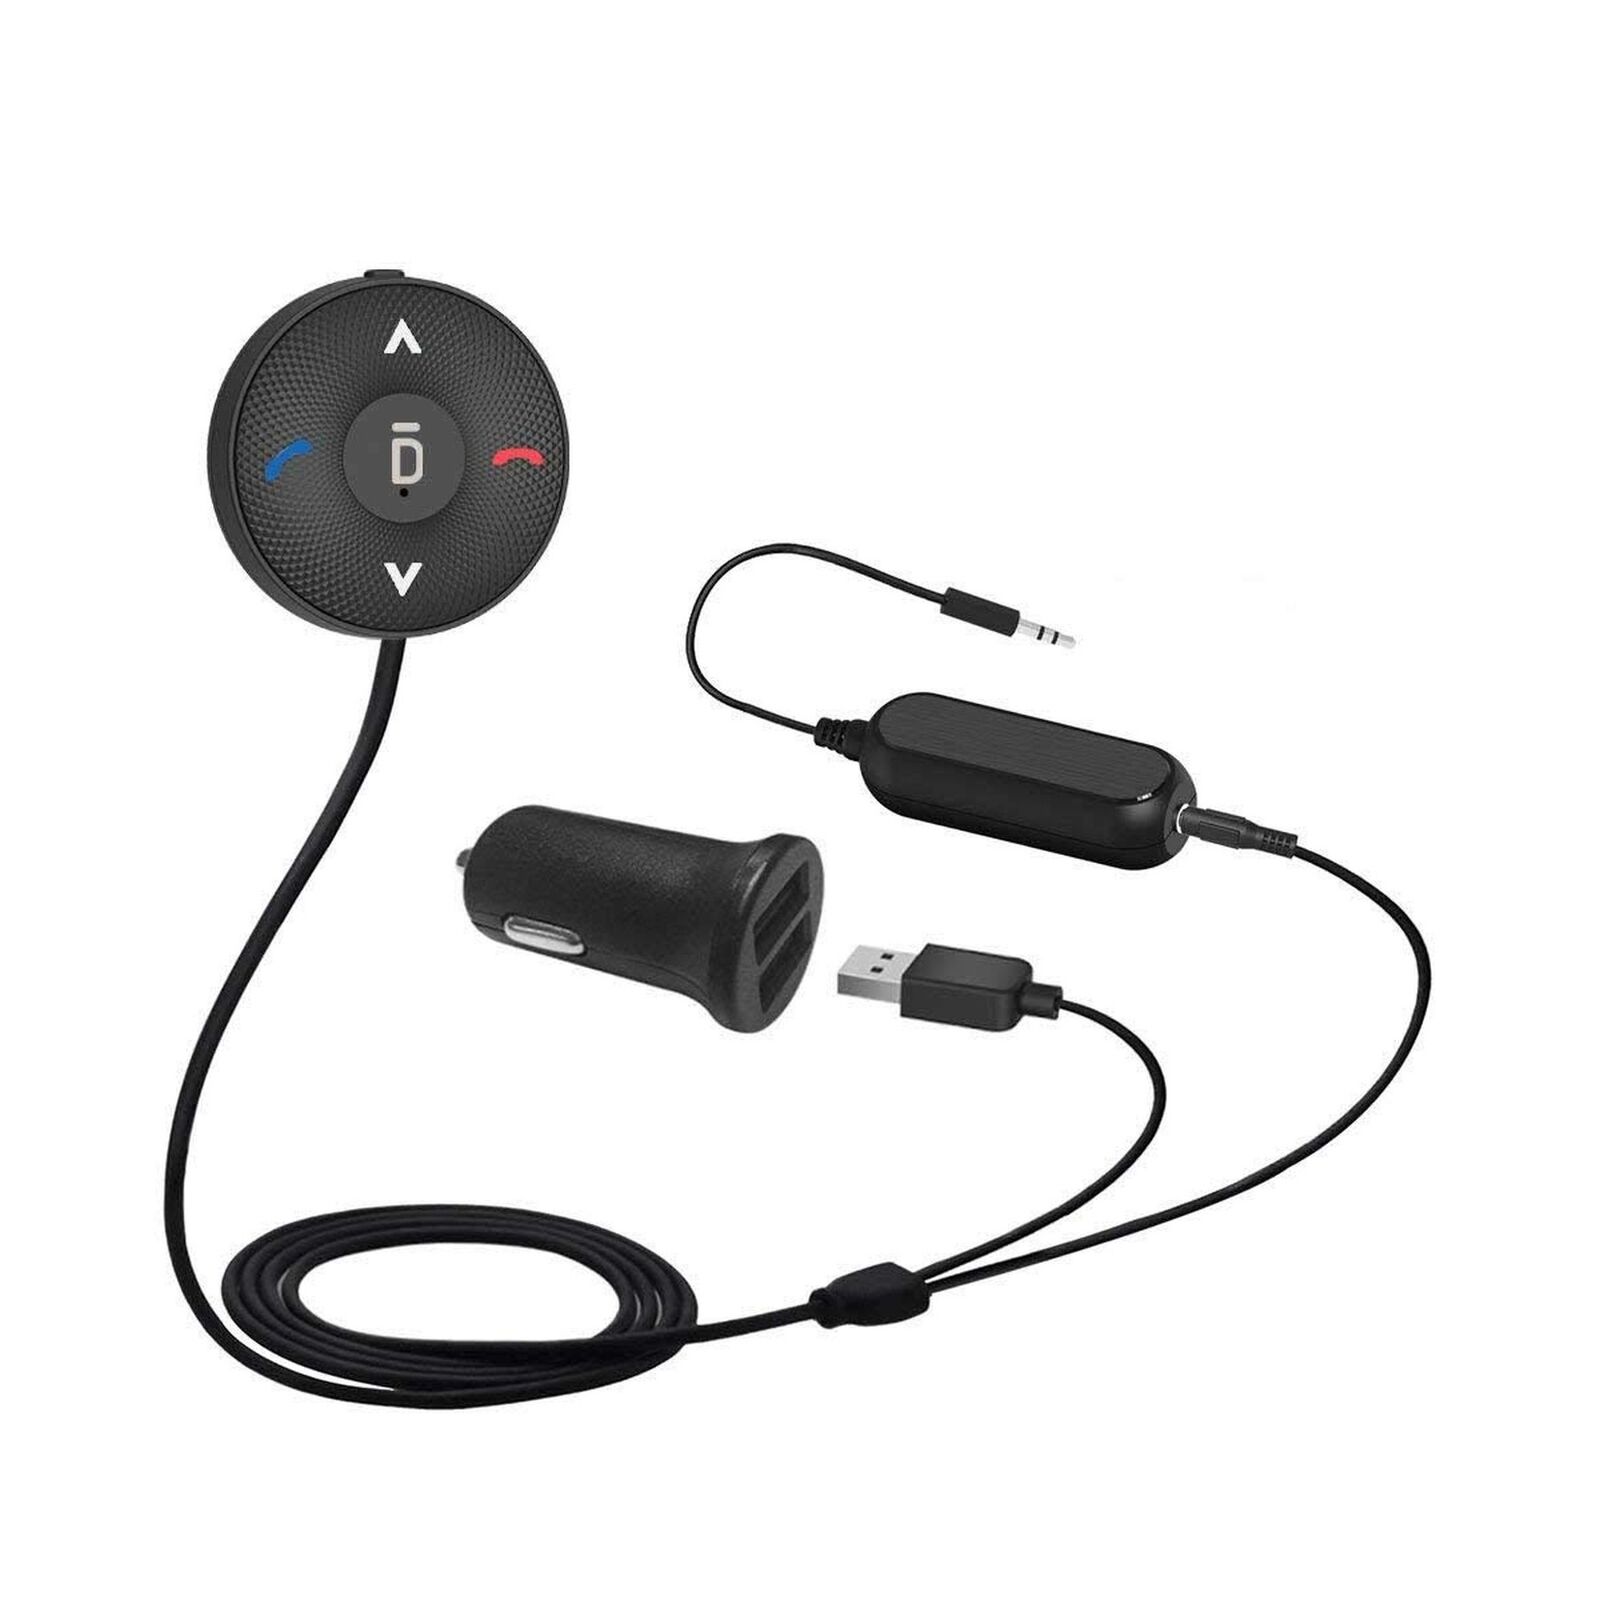 Besign Bluetooth 4.1 Car Kit for Handsfree Talking and Music Streaming, Wirel...